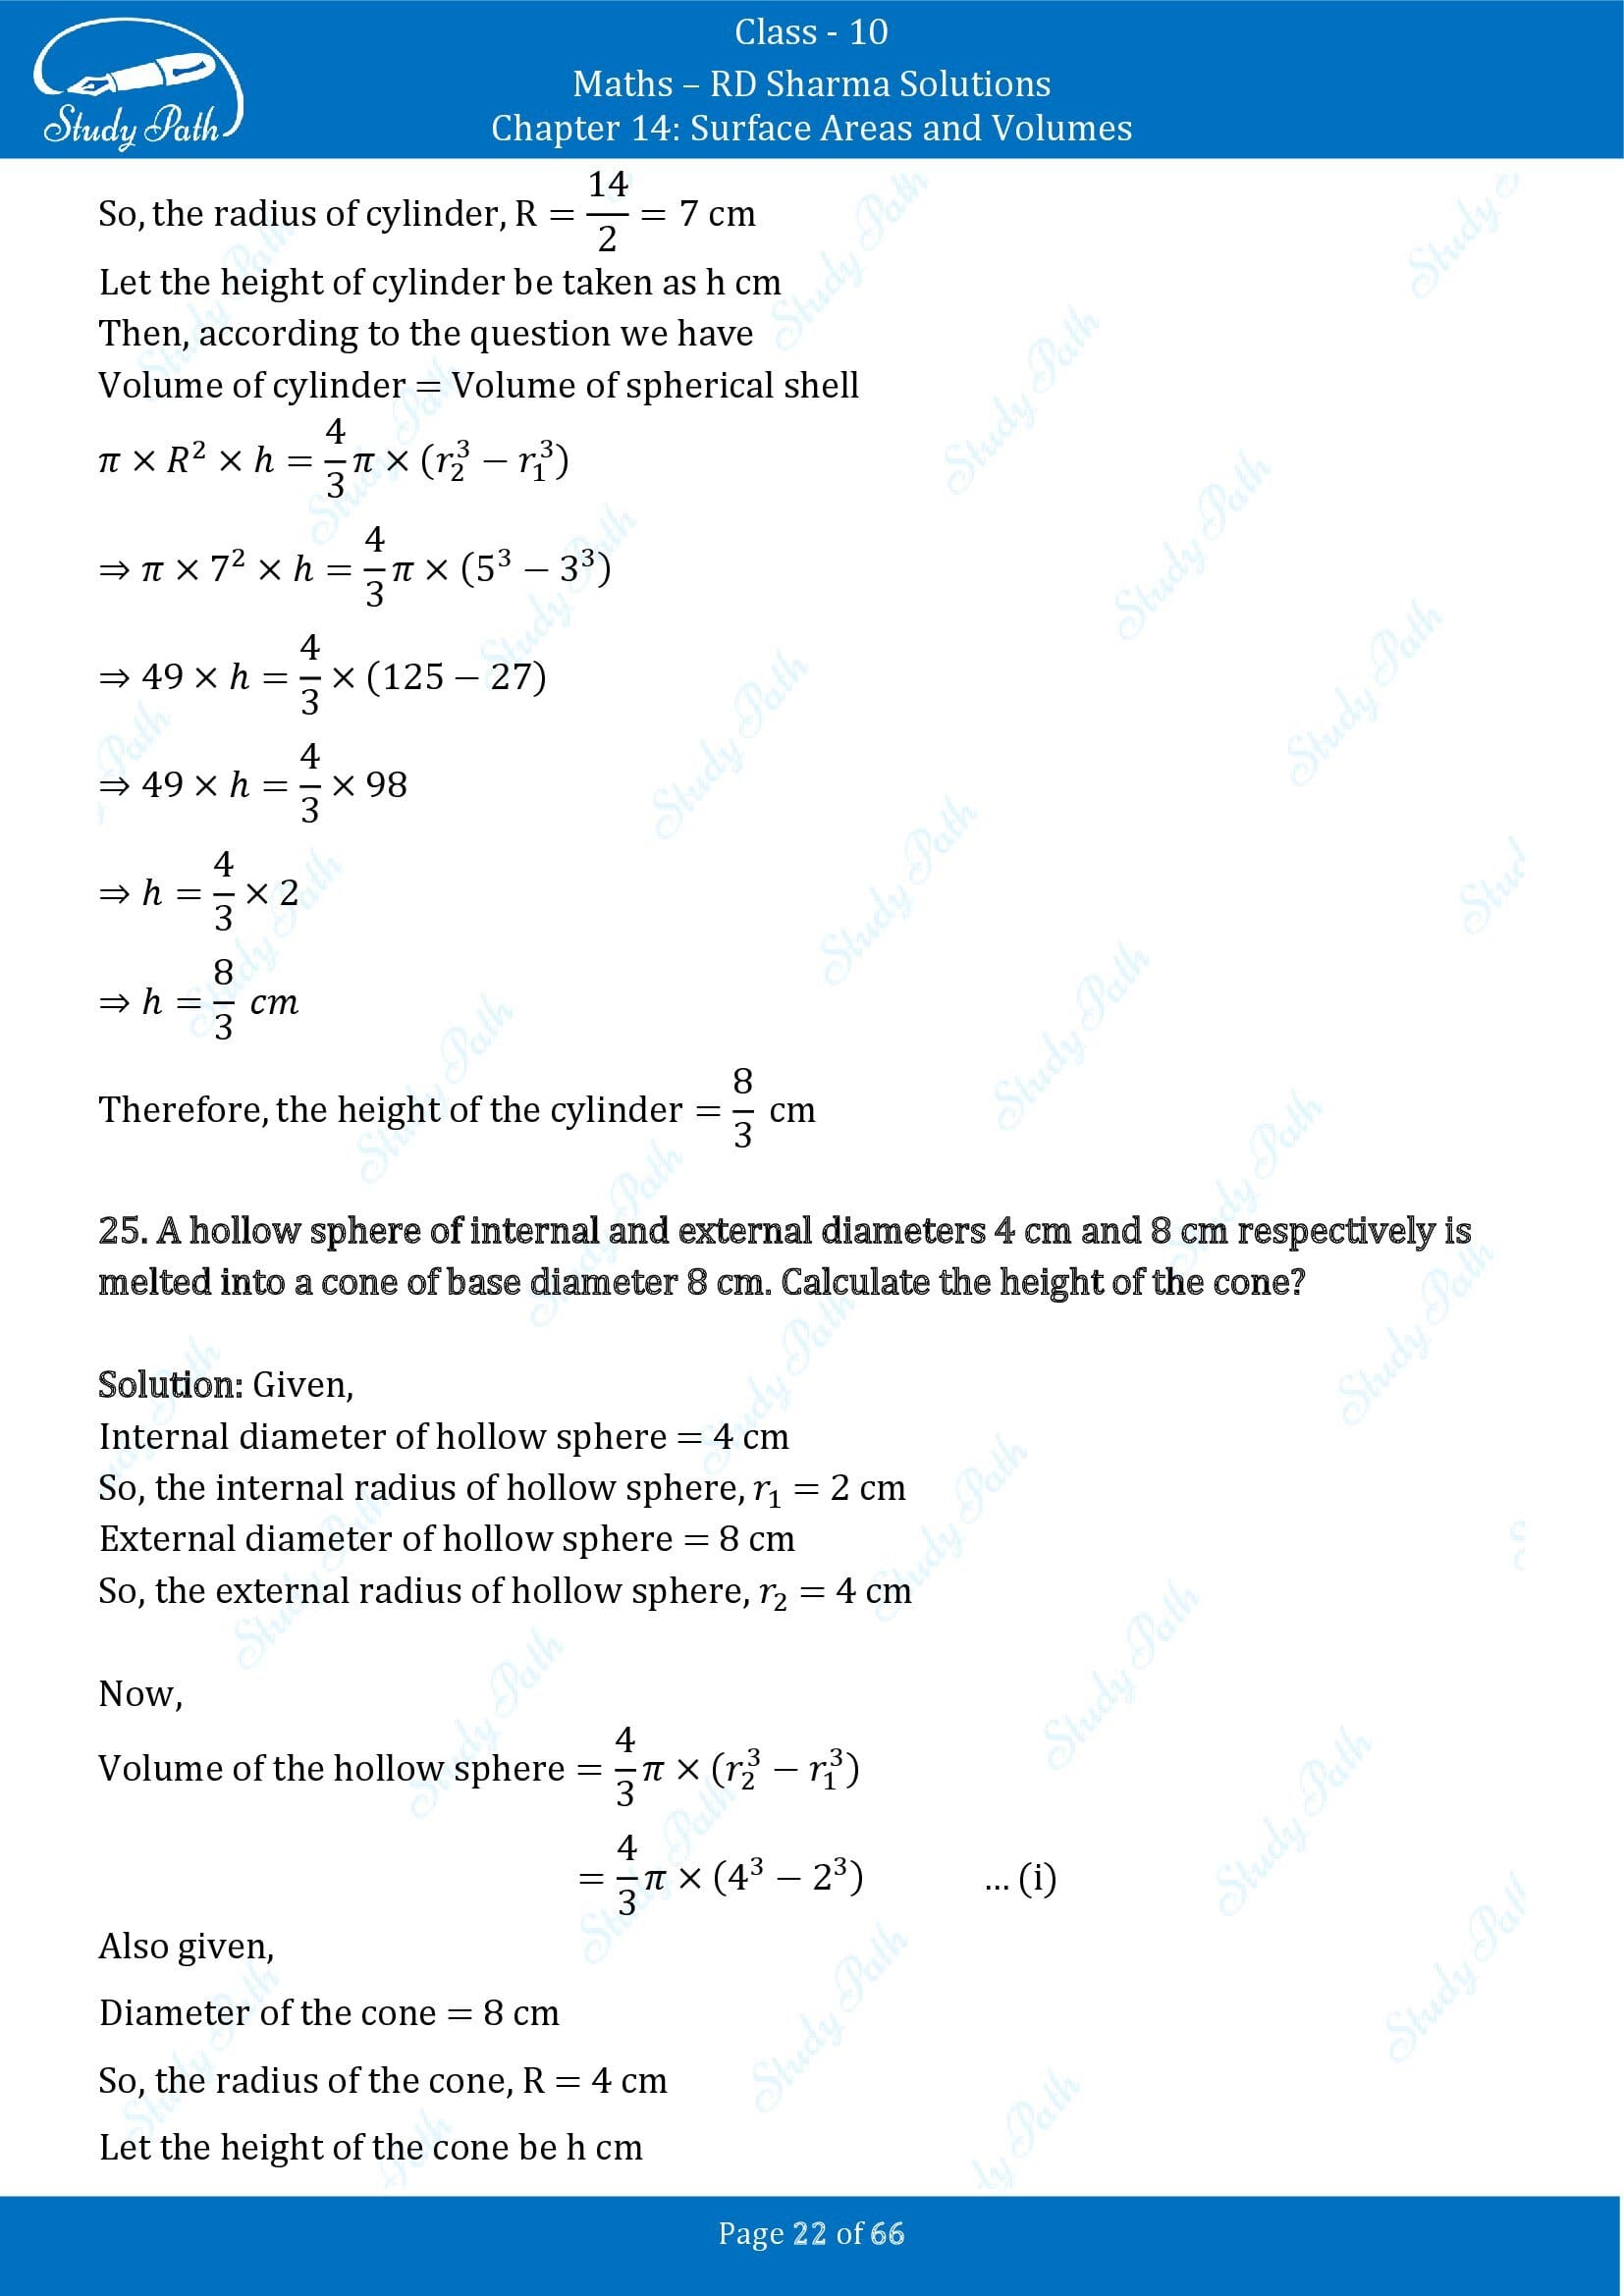 RD Sharma Solutions Class 10 Chapter 14 Surface Areas and Volumes Exercise 14.1 00022